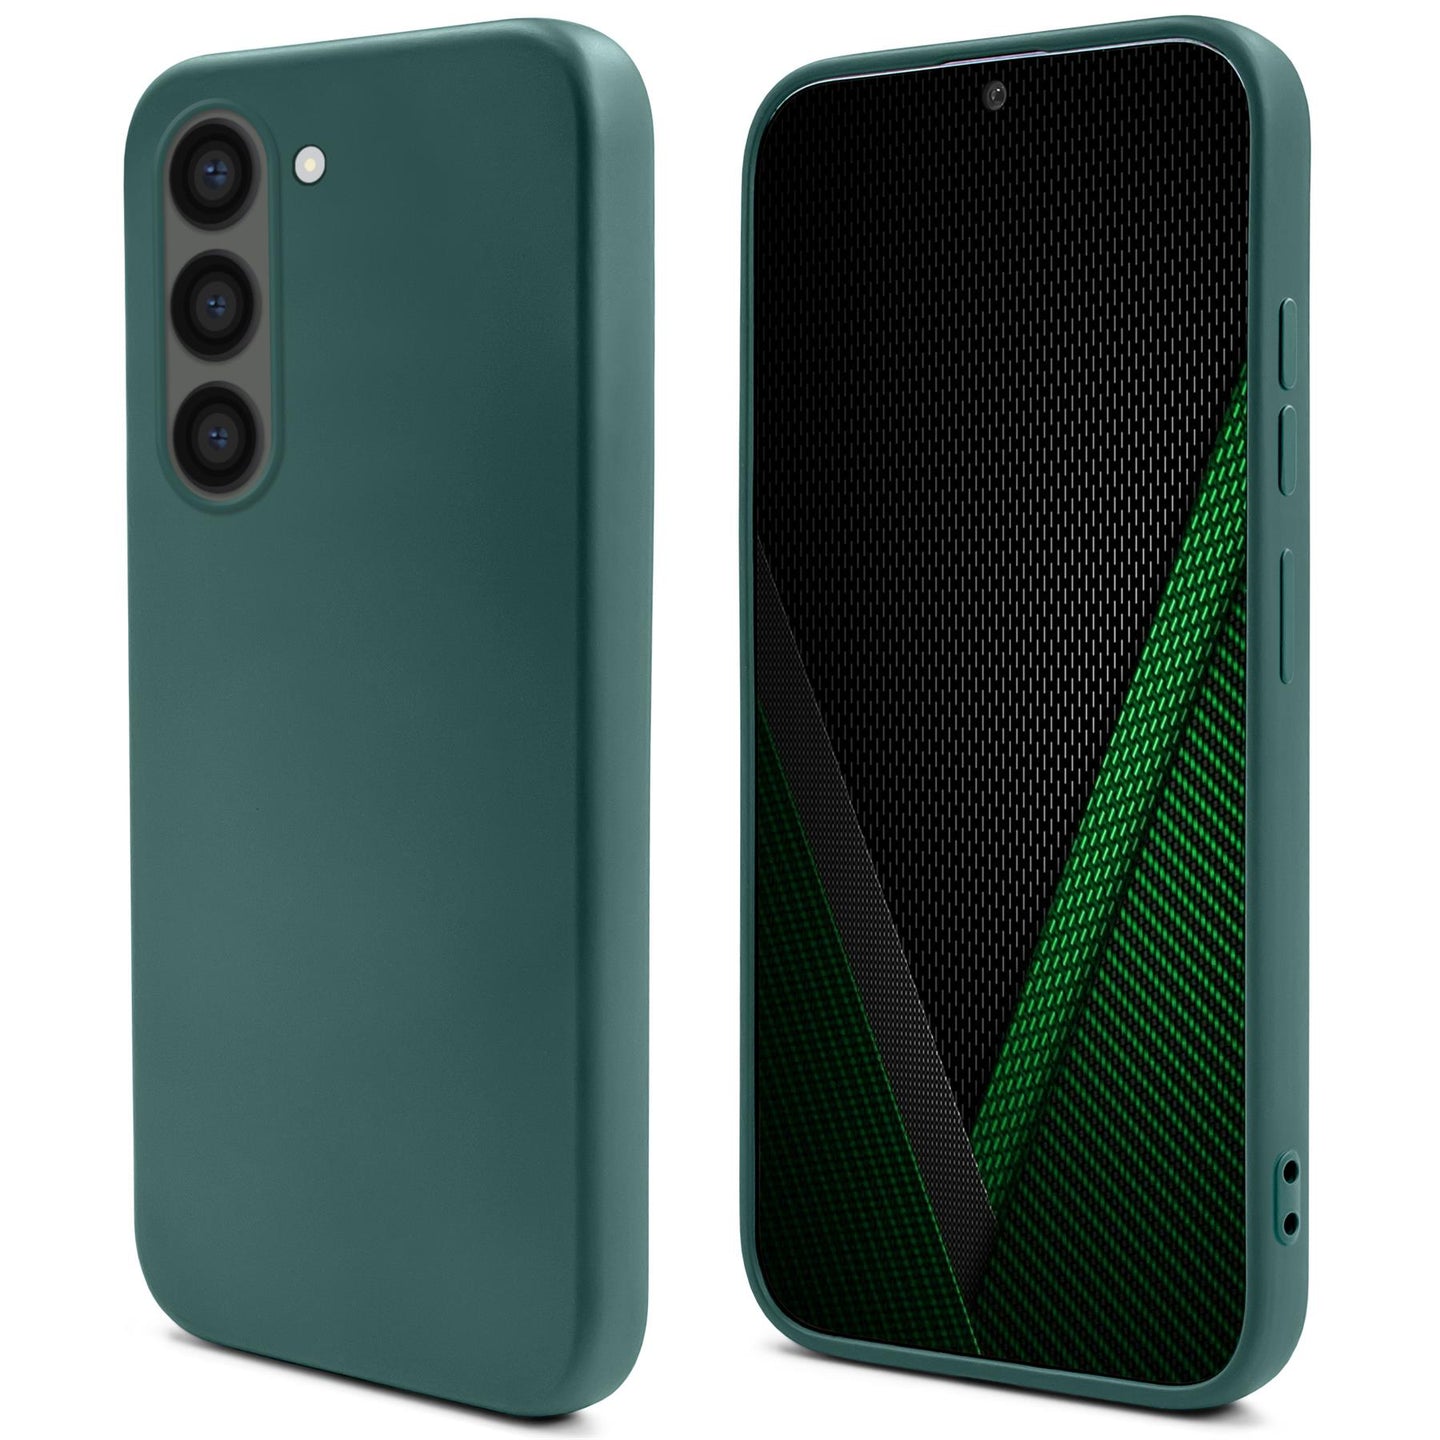 Moozy Lifestyle. Silicone Case for Samsung S23, Dark Green - Liquid Silicone Lightweight Cover with Matte Finish and Soft Microfiber Lining, Premium Silicone Case